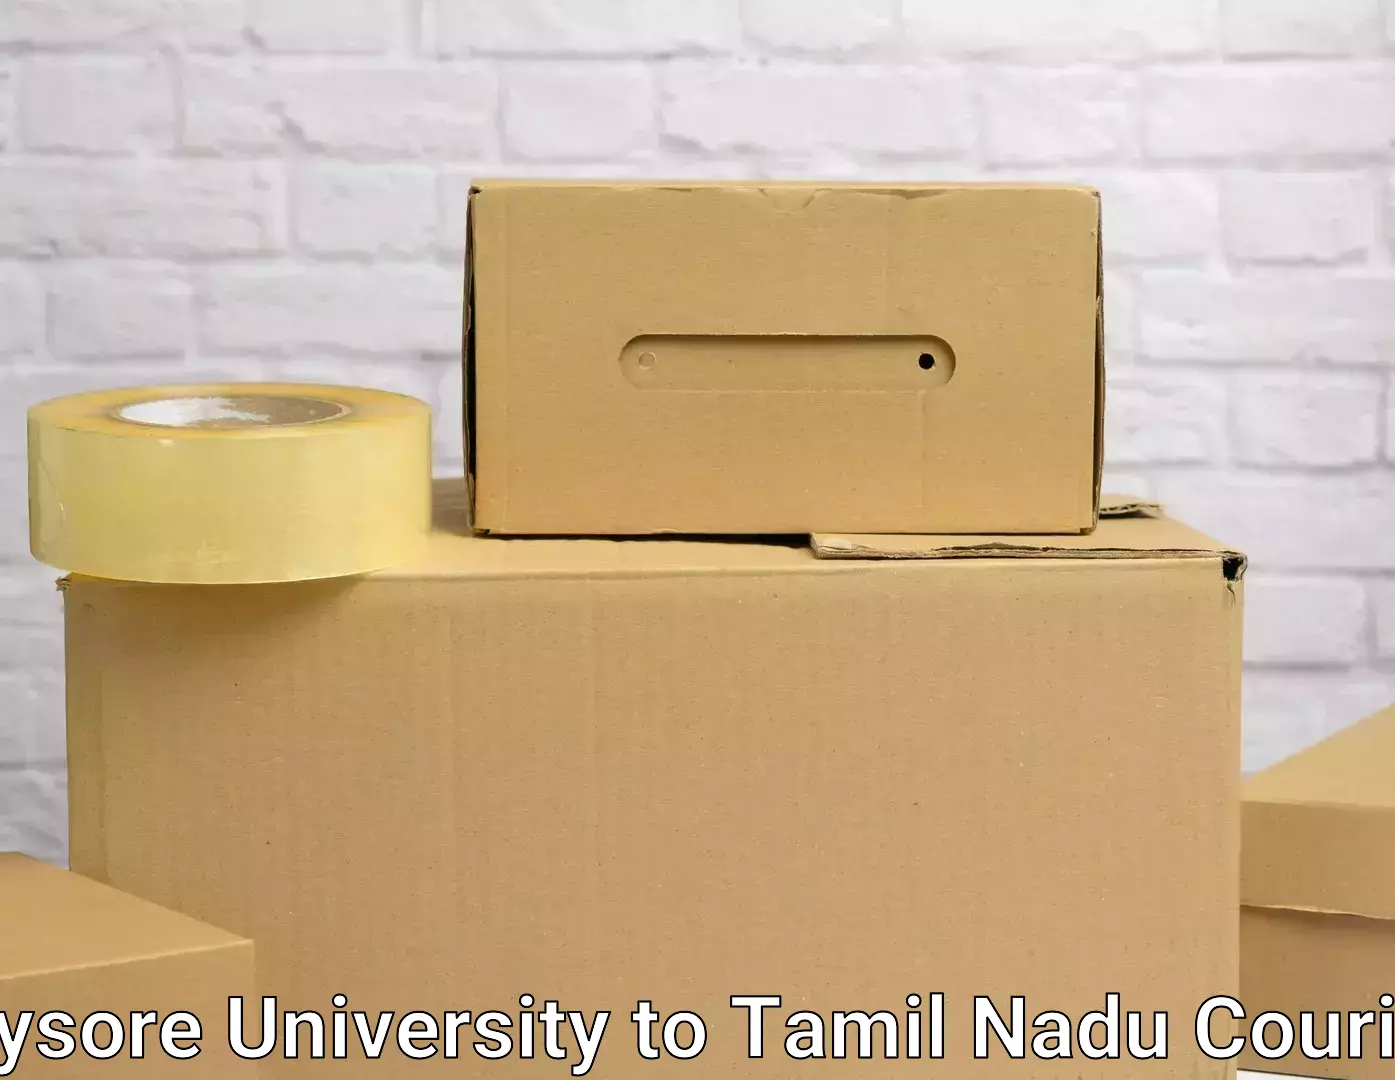 Safe home goods transport Mysore University to SRM Institute of Science and Technology Chennai